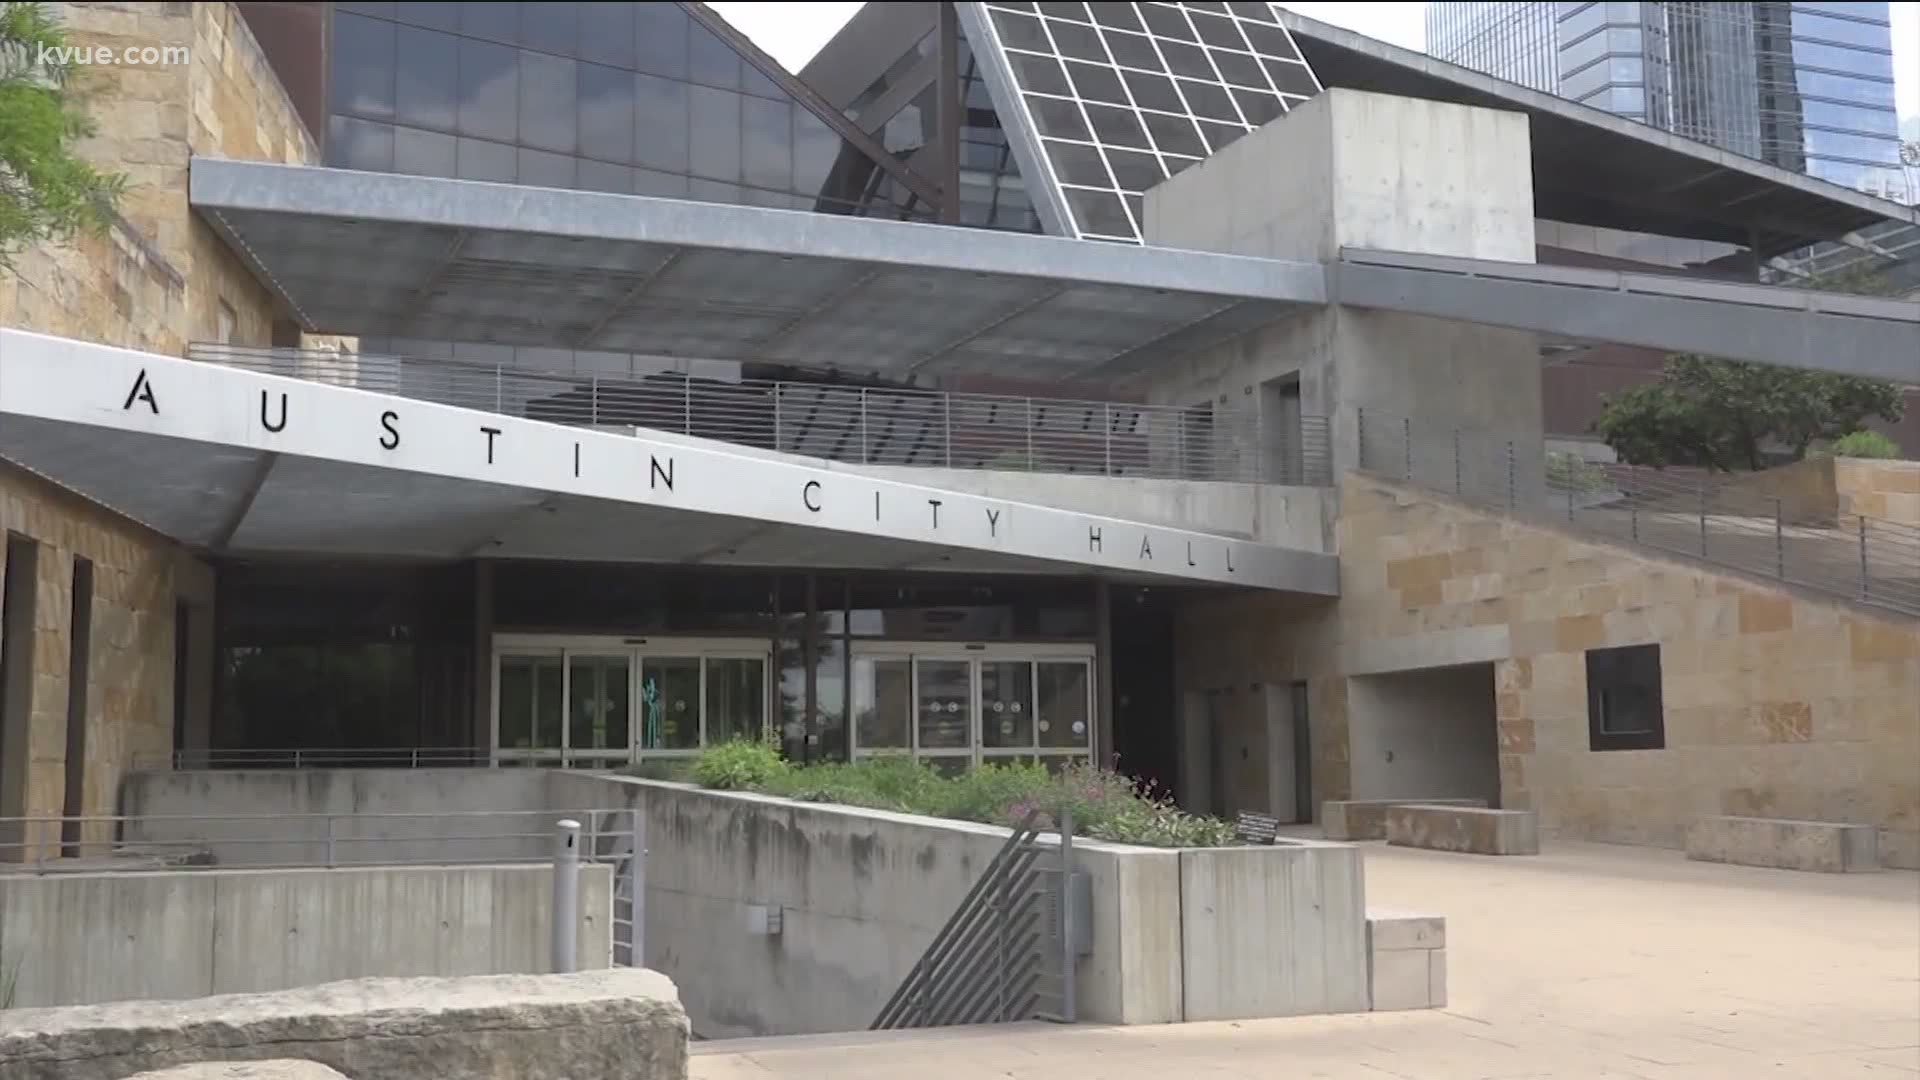 Some members of the Austin City Council want to restructure the police department. On June 11, the council will vote on resolutions aimed at achieving that.